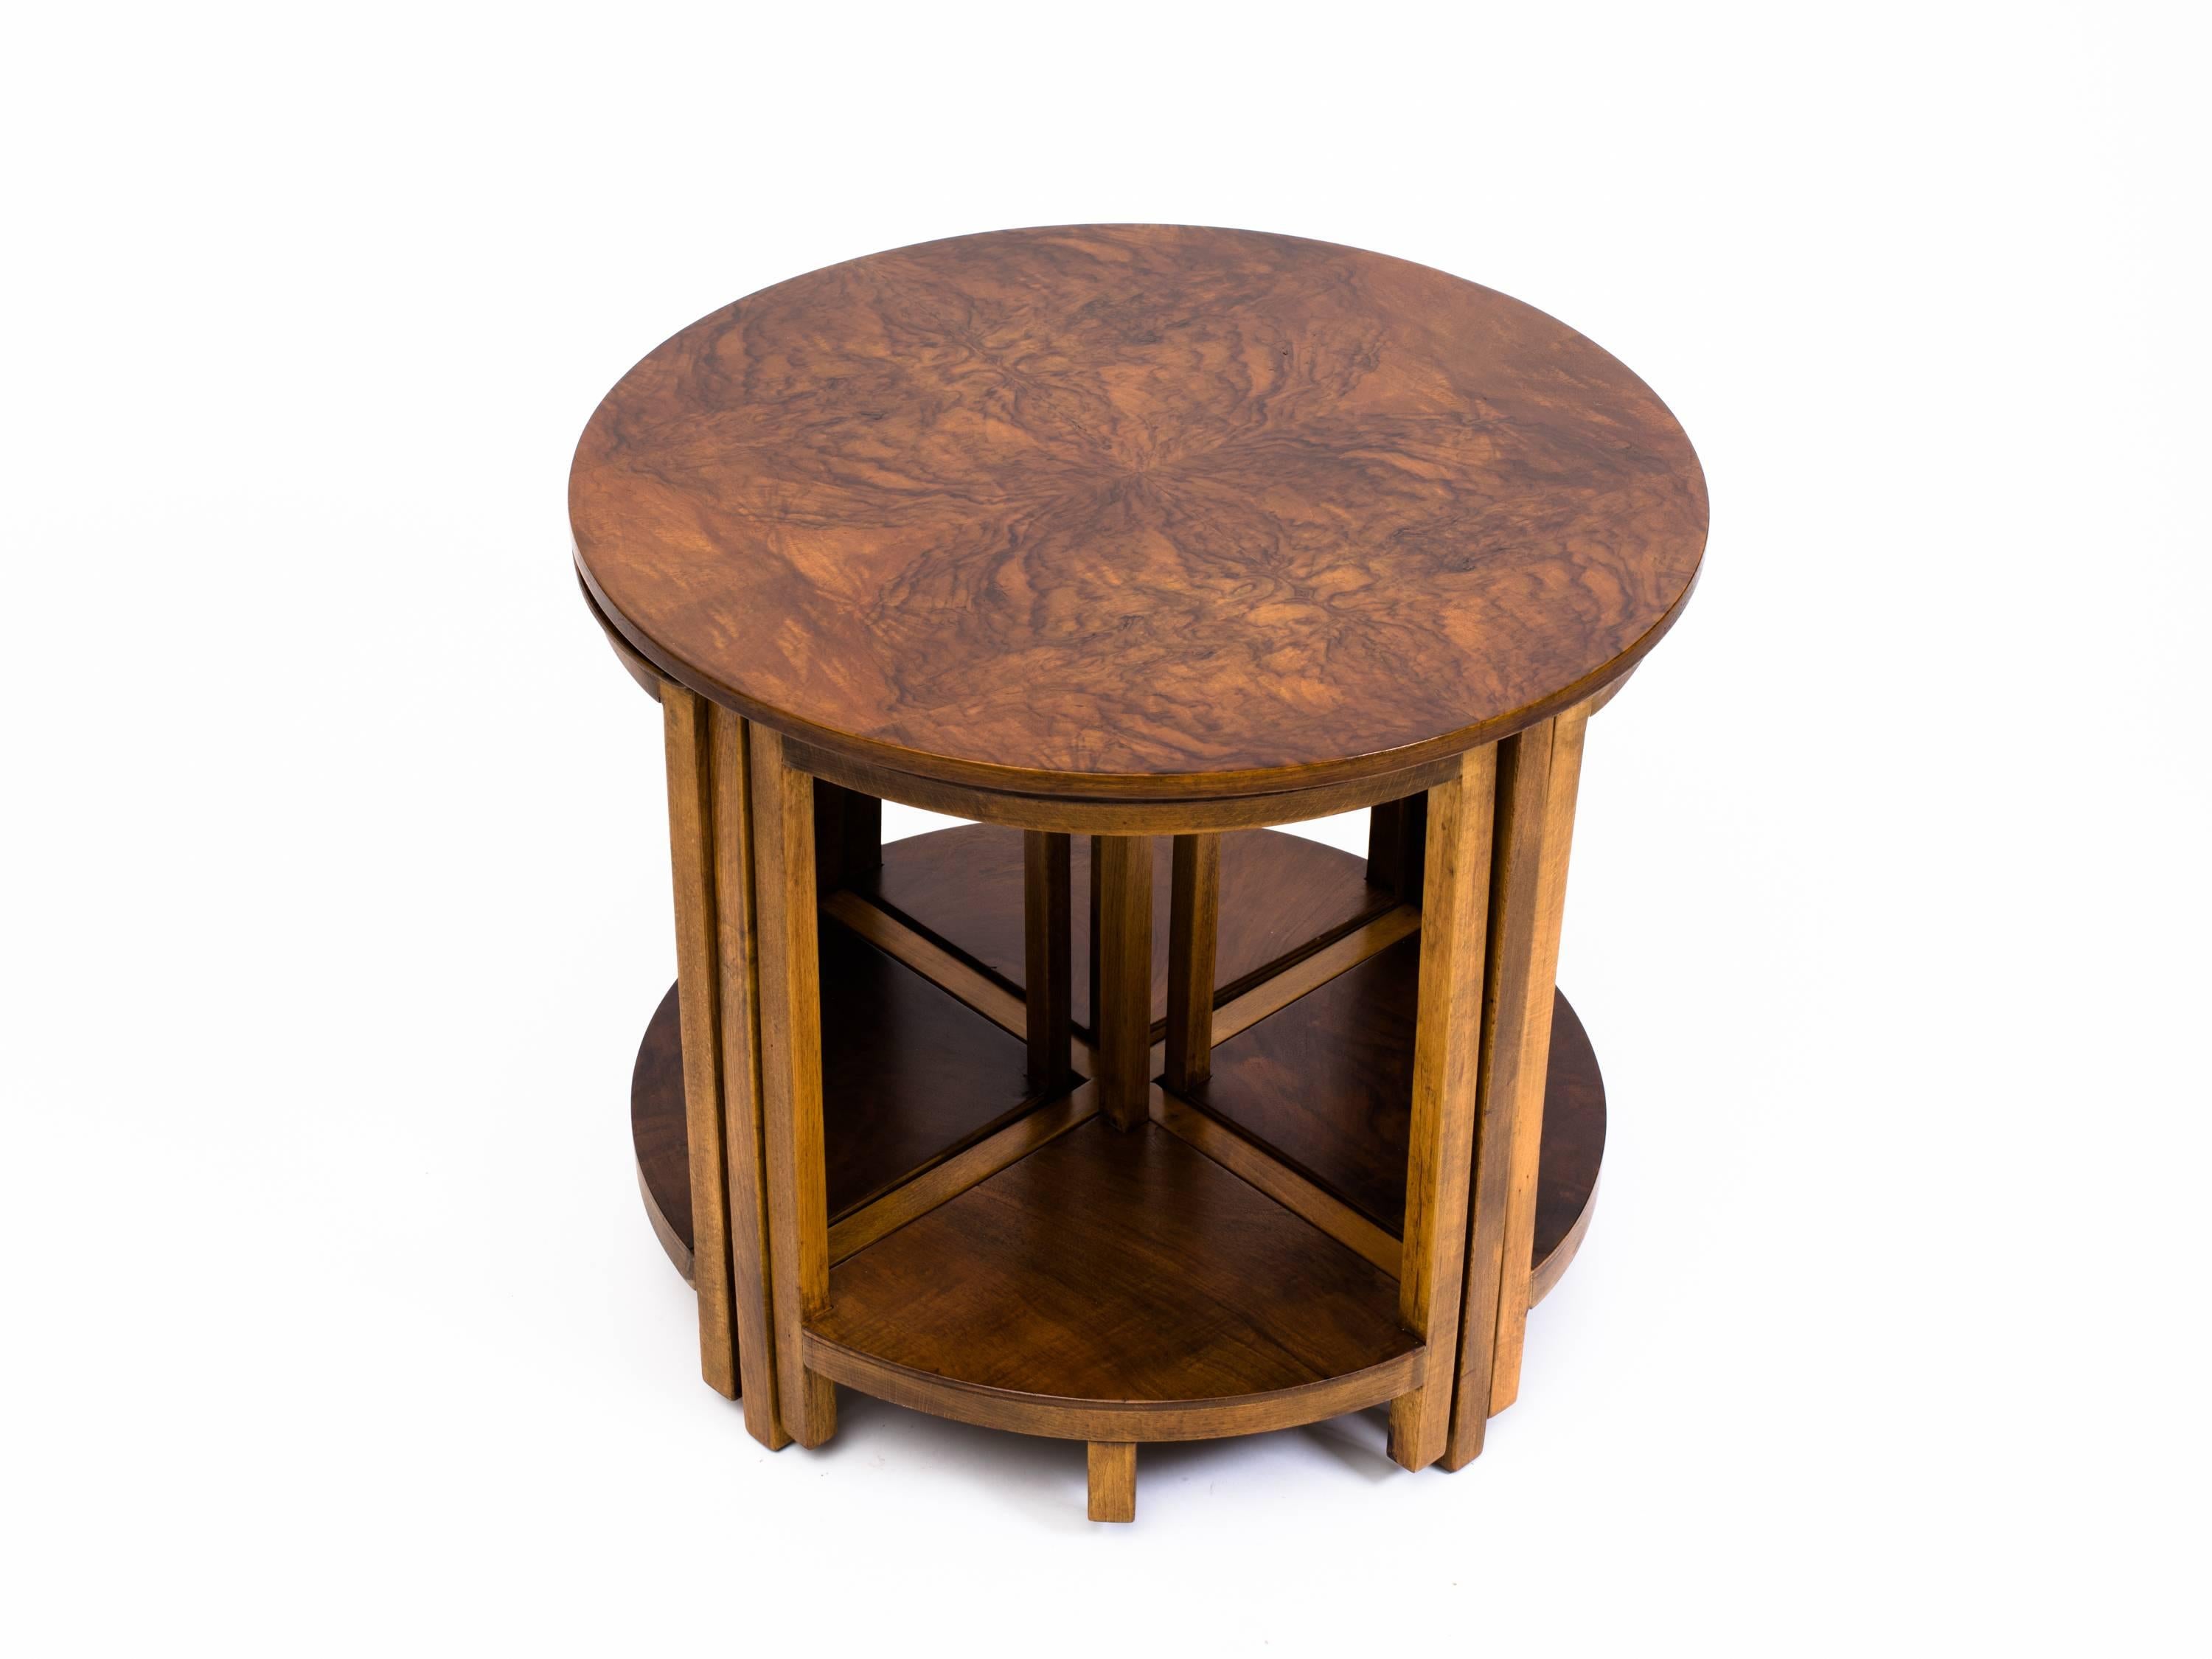 Machine Age walnut circular walnut burl end table with nesting tables. Four nesting tables each with unique grain to tops and shelves, pull-out from under table. 
In the style of Art Deco designer Donald Deskey, who designed all the interiors and